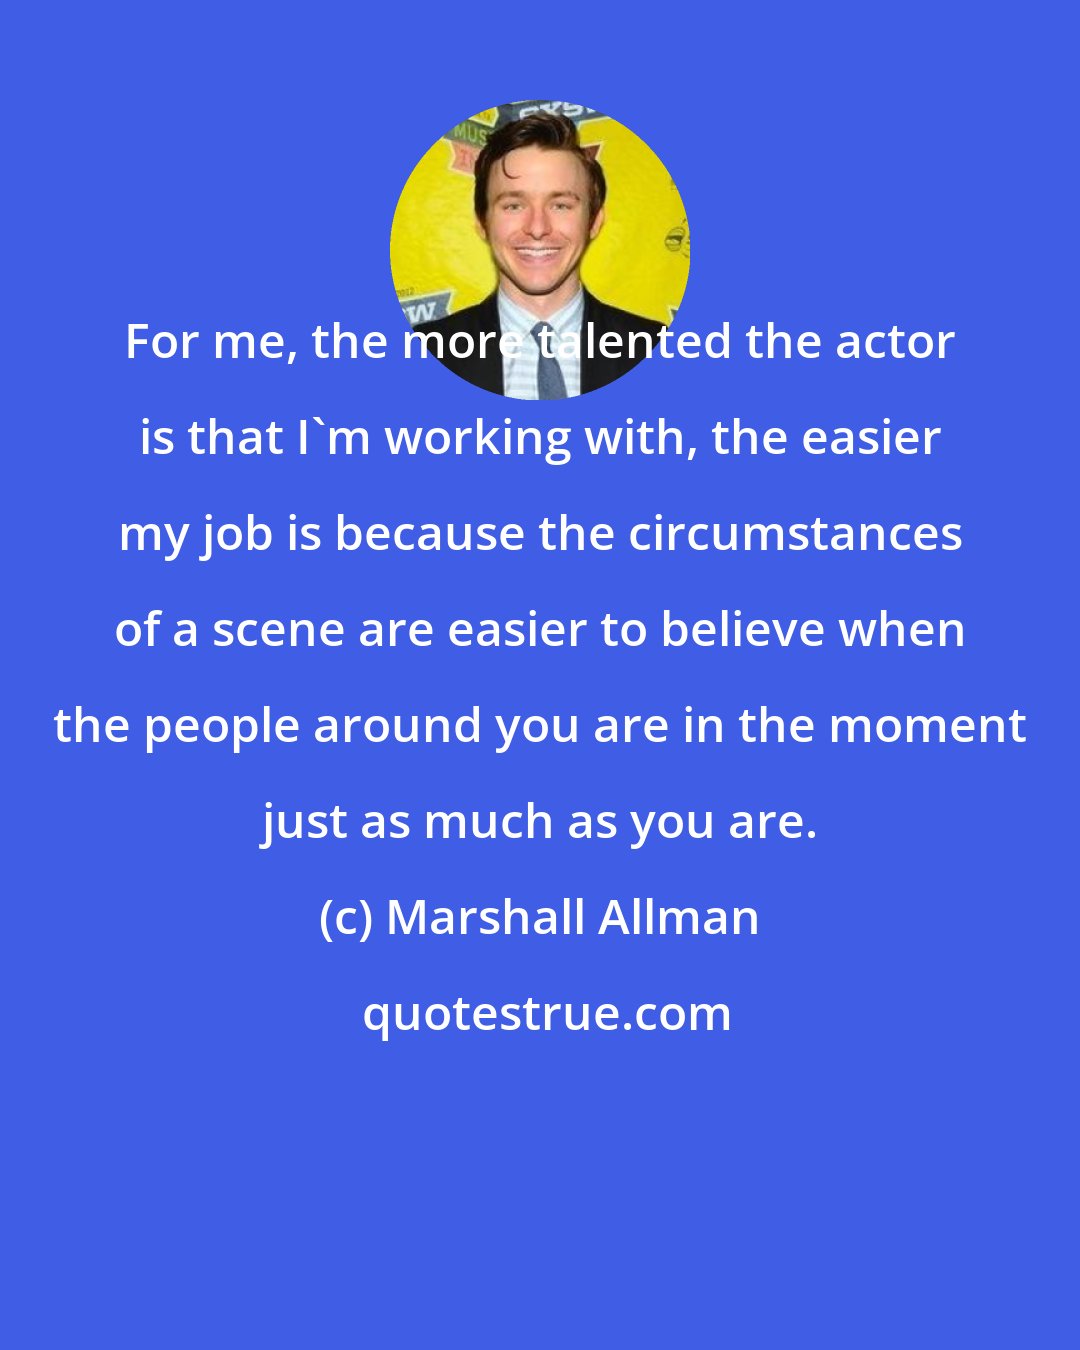 Marshall Allman: For me, the more talented the actor is that I'm working with, the easier my job is because the circumstances of a scene are easier to believe when the people around you are in the moment just as much as you are.